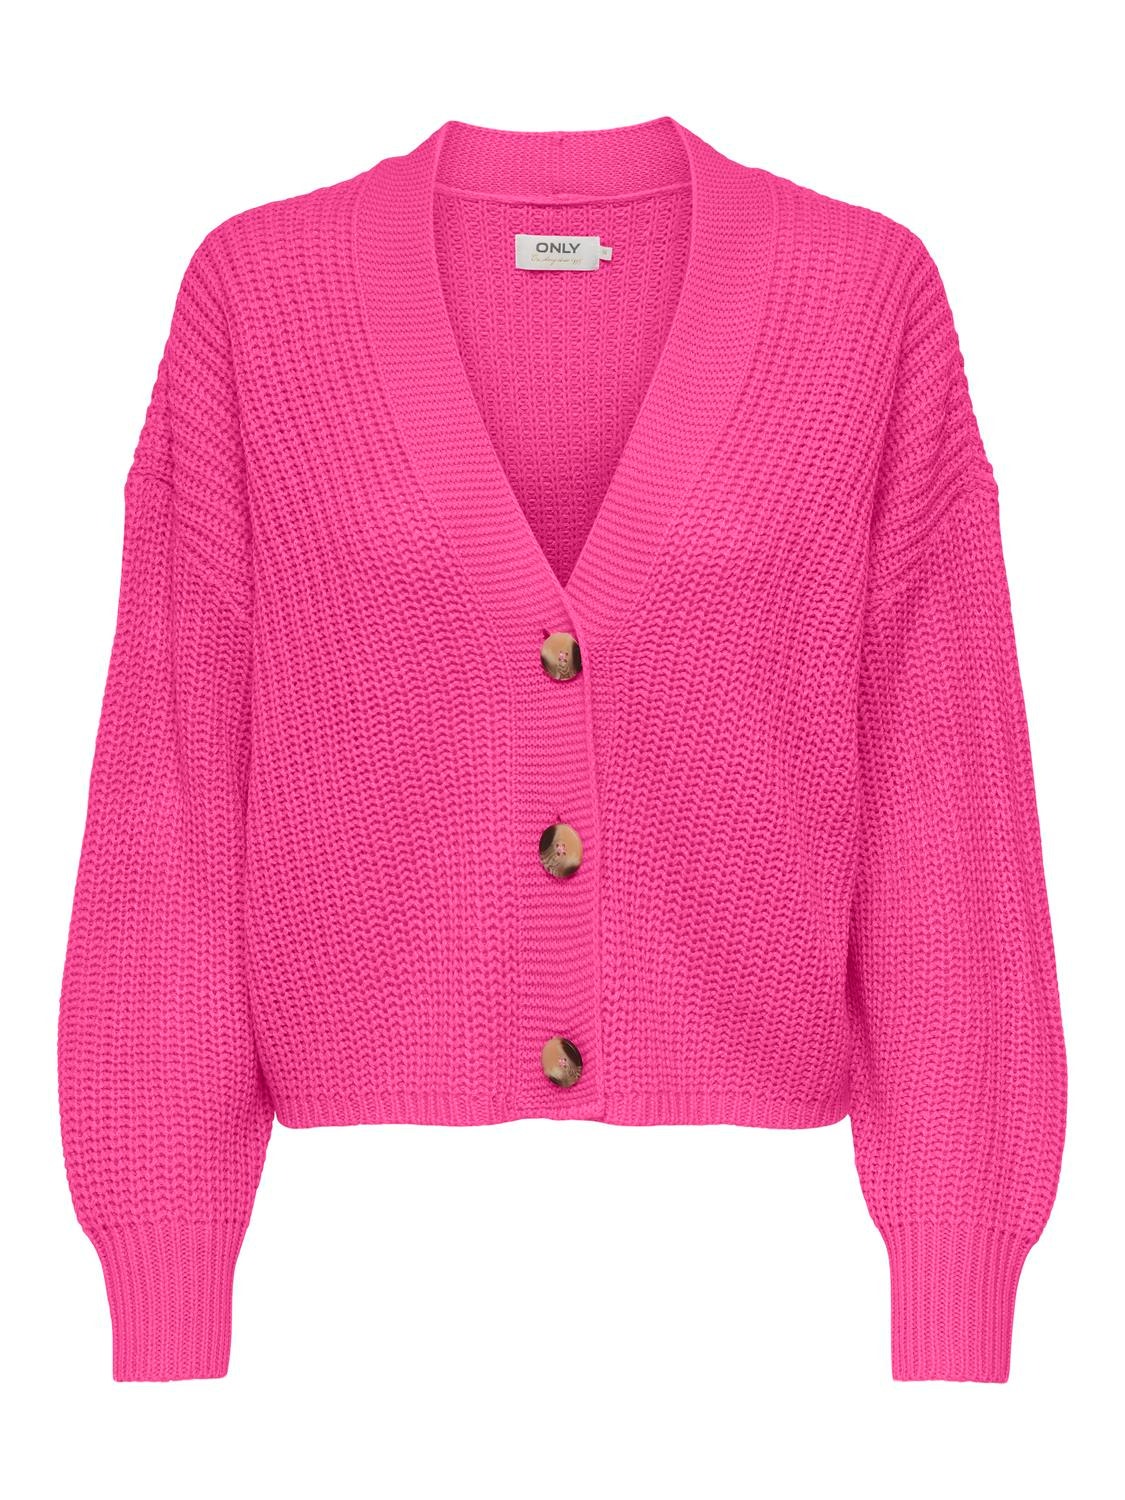 ONLY Knitted cardigan -Raspberry Rose - 15211521